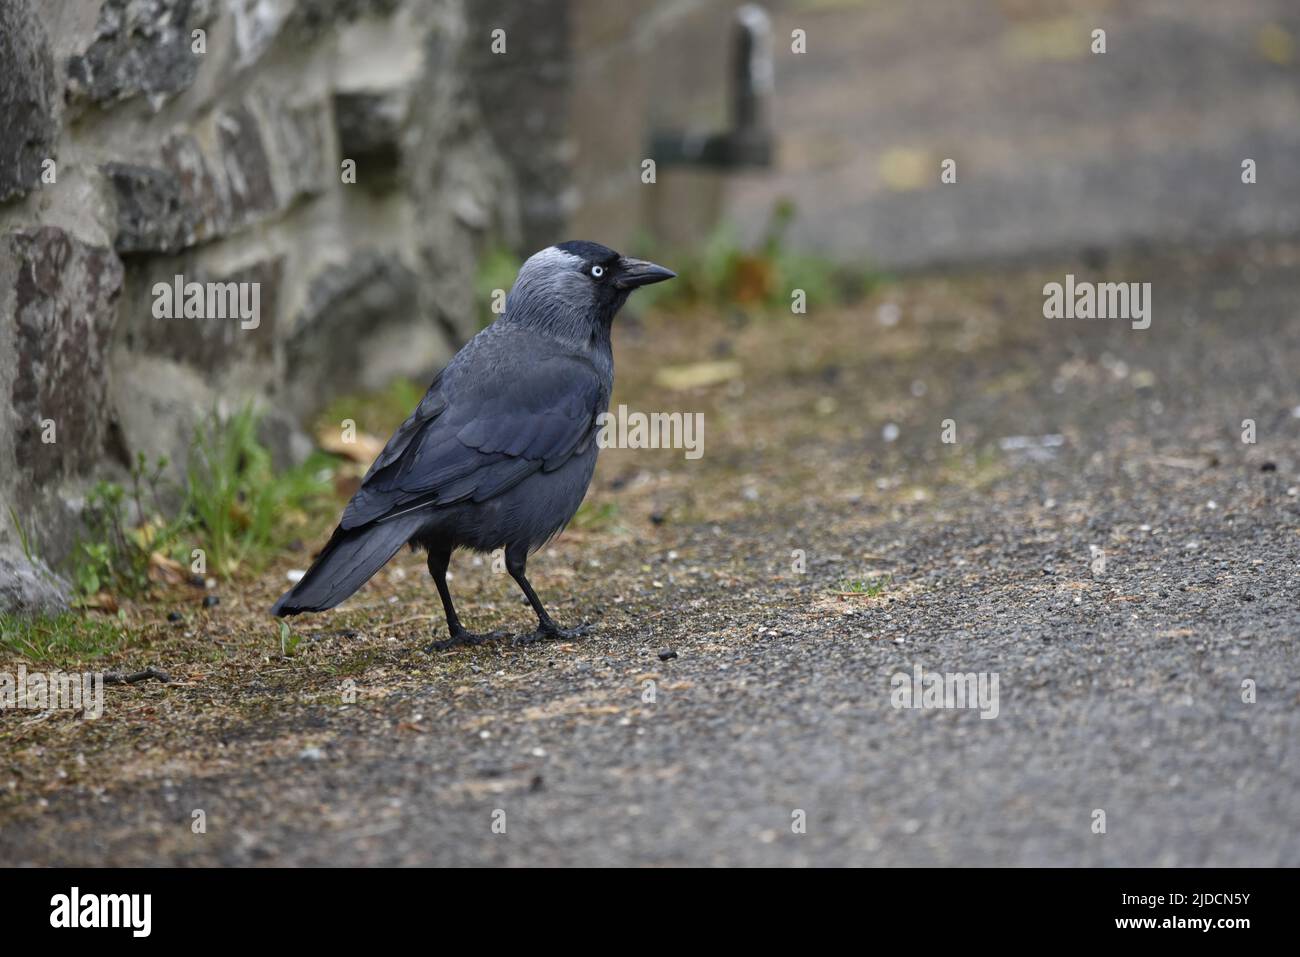 Close-Up Right-Profile Image of a Western Jackdaw (Corvus monedula) to Left of Shot, Copy Space to Right of Shot, Standing on Tarmac with Rock Wall Stock Photo